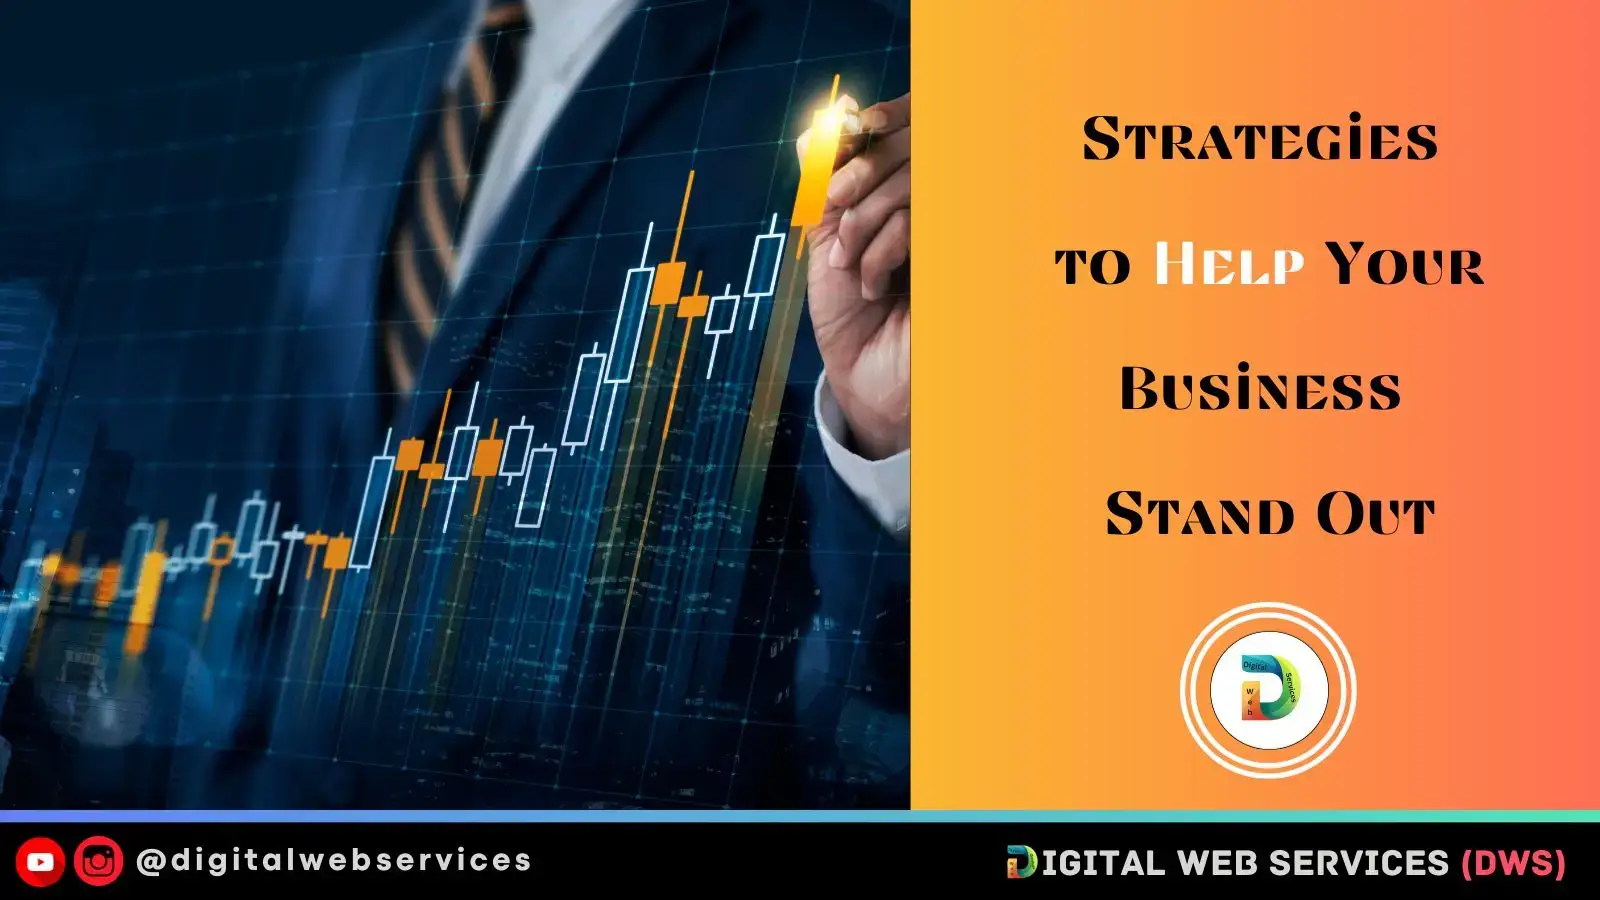 Strategies to Help Your Business Stand Out